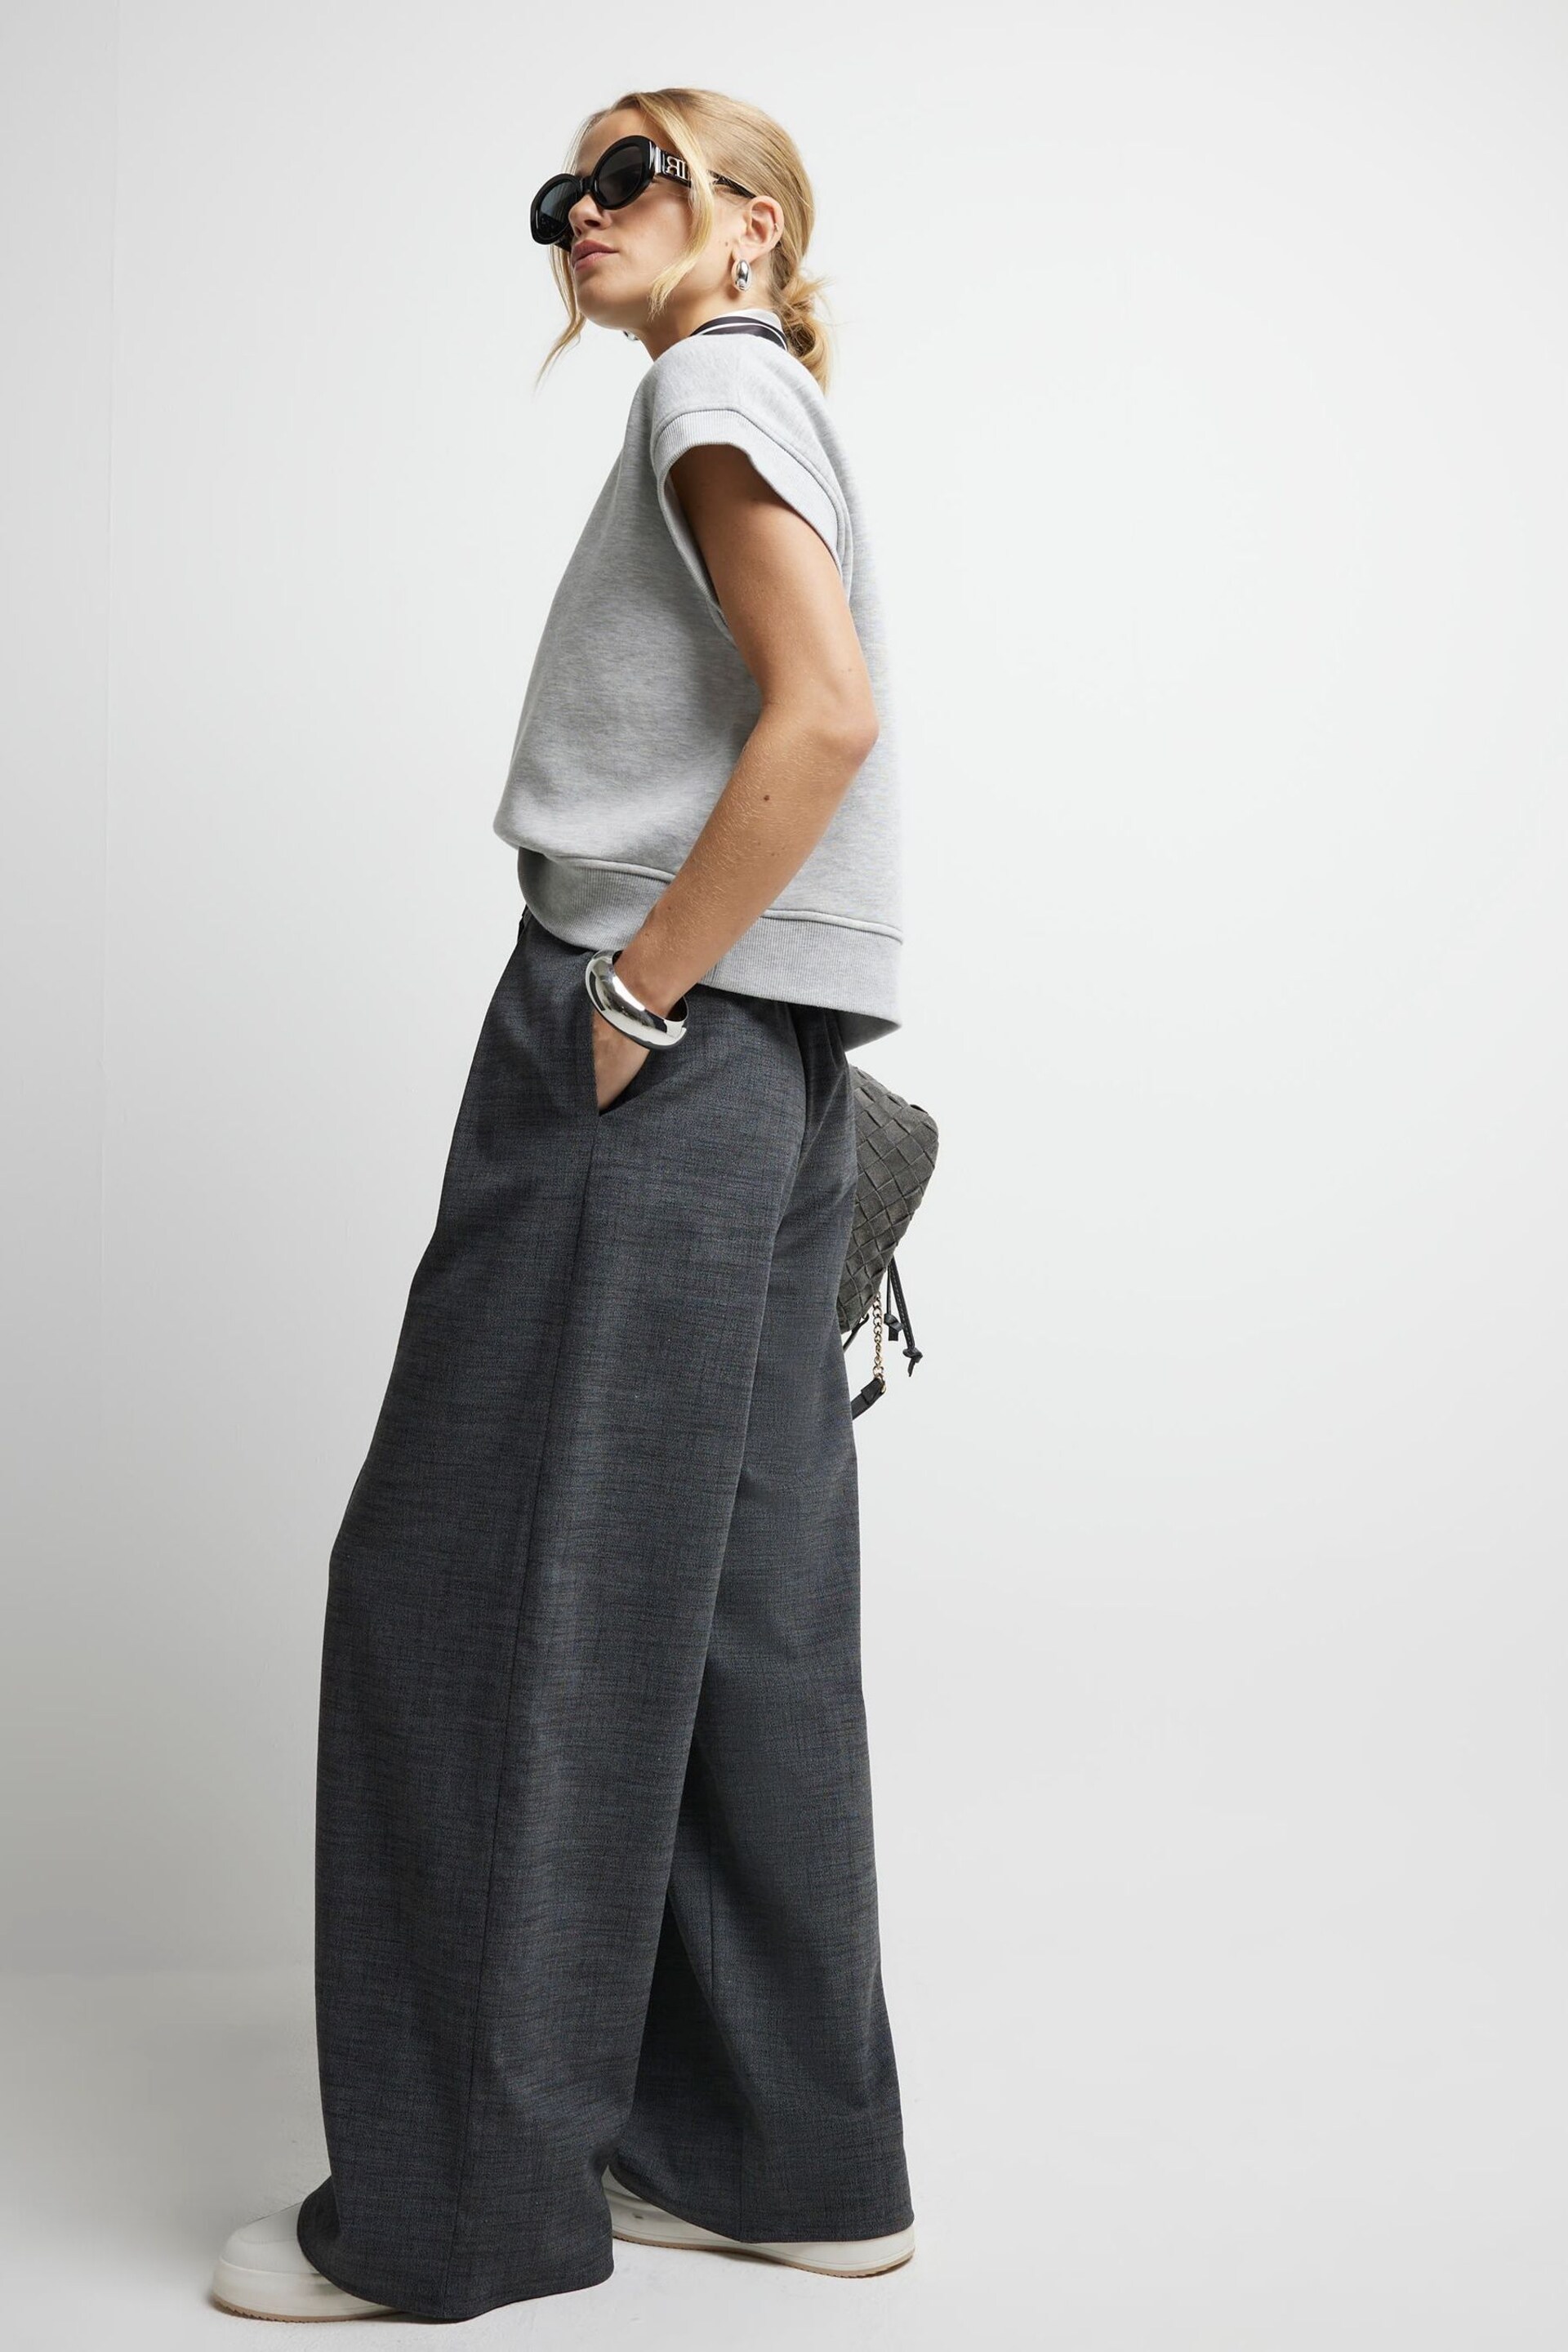 River Island Grey Wide Leg Pleated Clean Trousers - Image 2 of 6